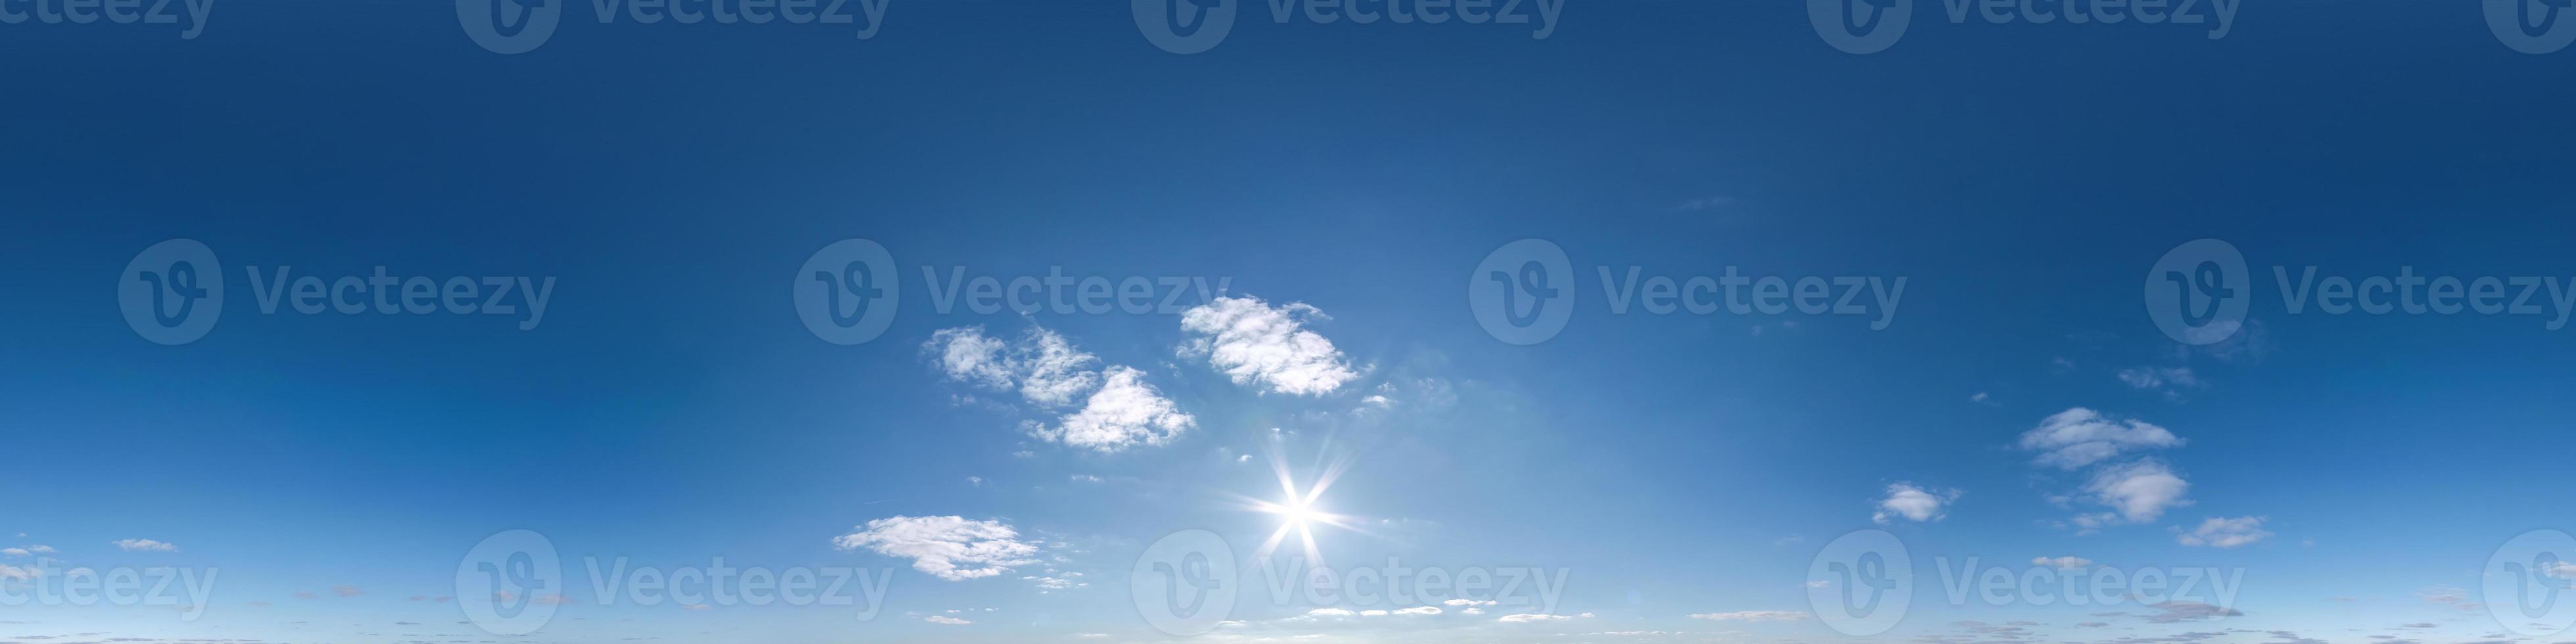 clear blue sky hdri 360 panorama in seamless projection with zenith for use in 3d graphics or game development as sky dome or edit drone shot for sky replacement photo